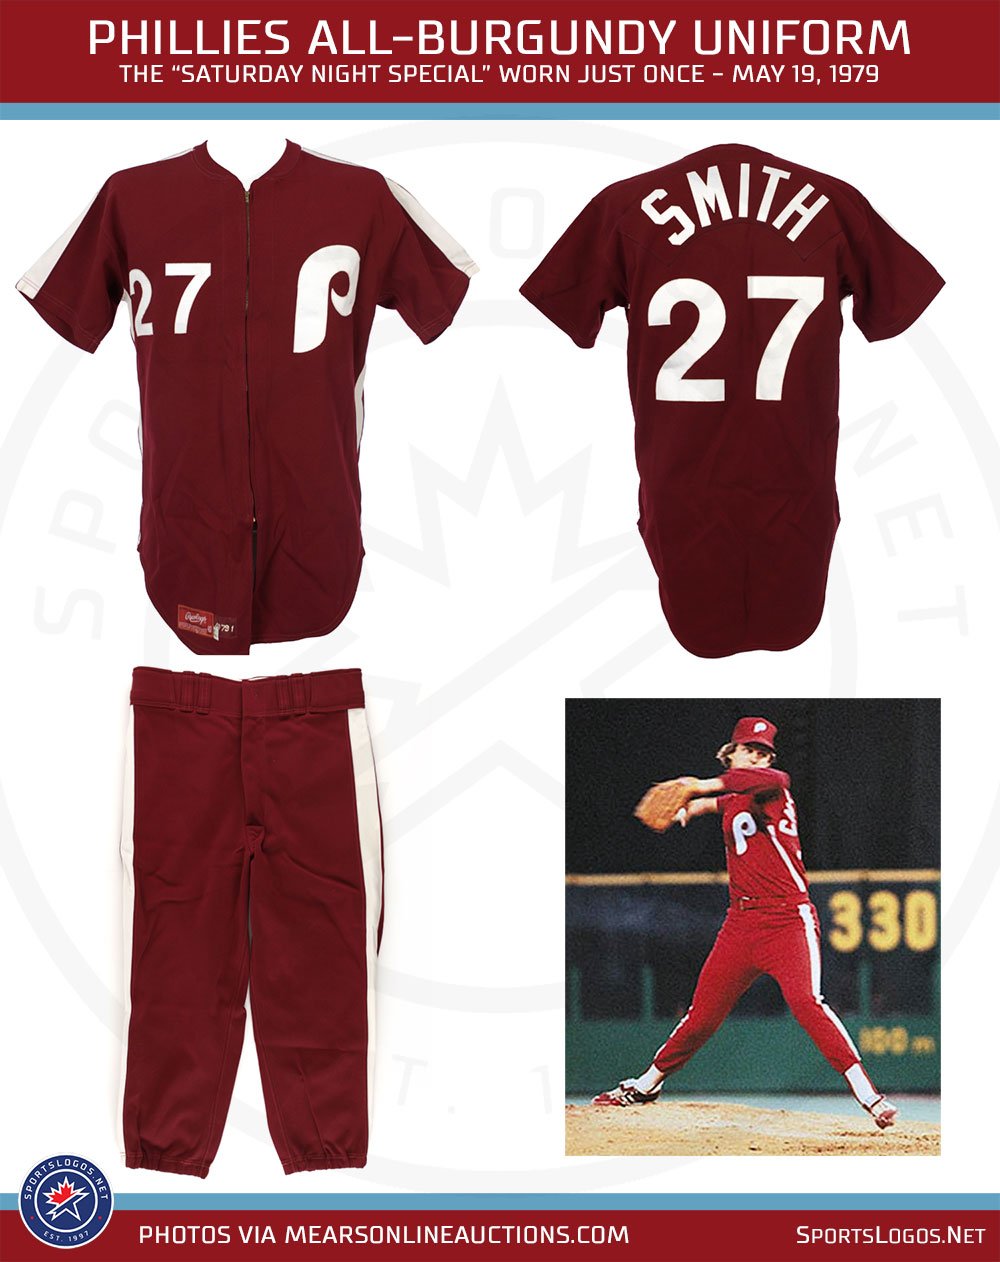 Chris Creamer  SportsLogos.Net on X: The 1979 #Phillies all-burgundy  uniform was worn just once before the players decided they'd never wear  them ever again so here we go again 40 years